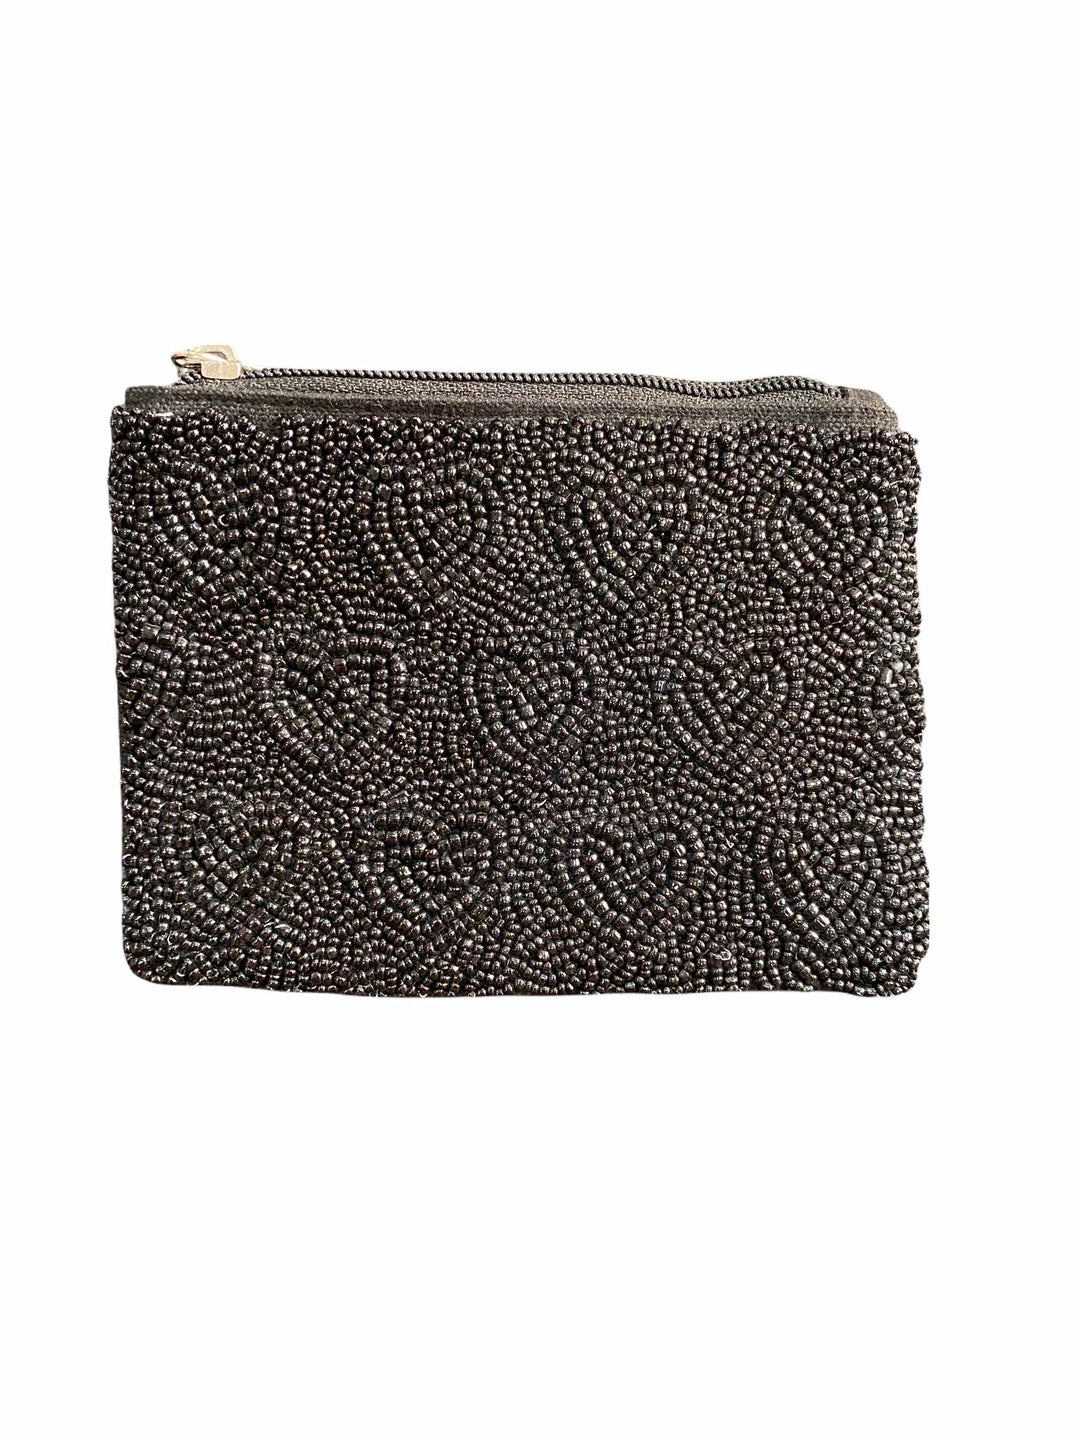 MONOCHROMATIC HEARTS COIN BAG - Kingfisher Road - Online Boutique